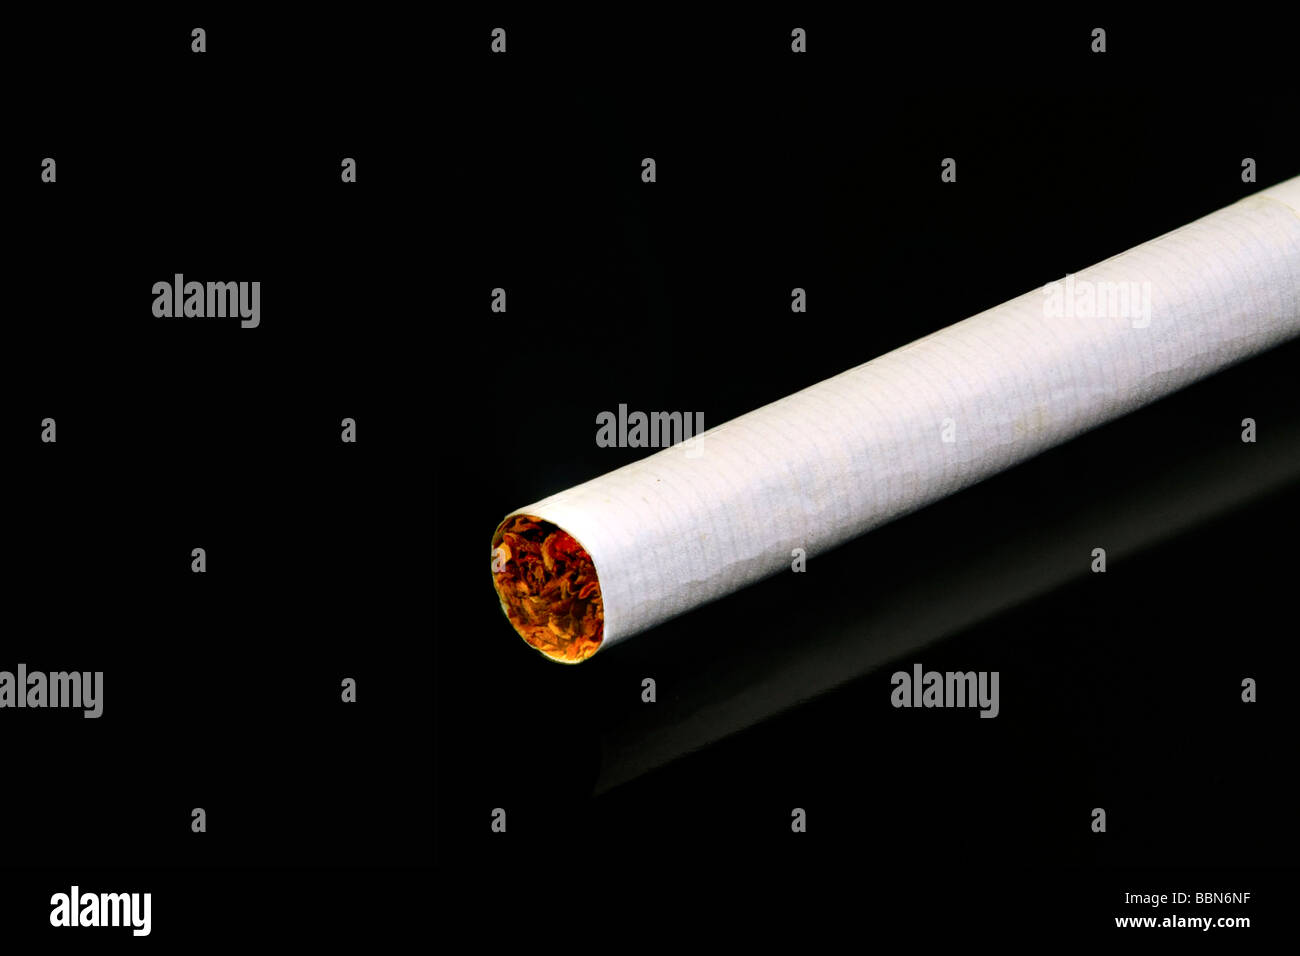 One single white cigarette on a black reflective surface Stock Photo